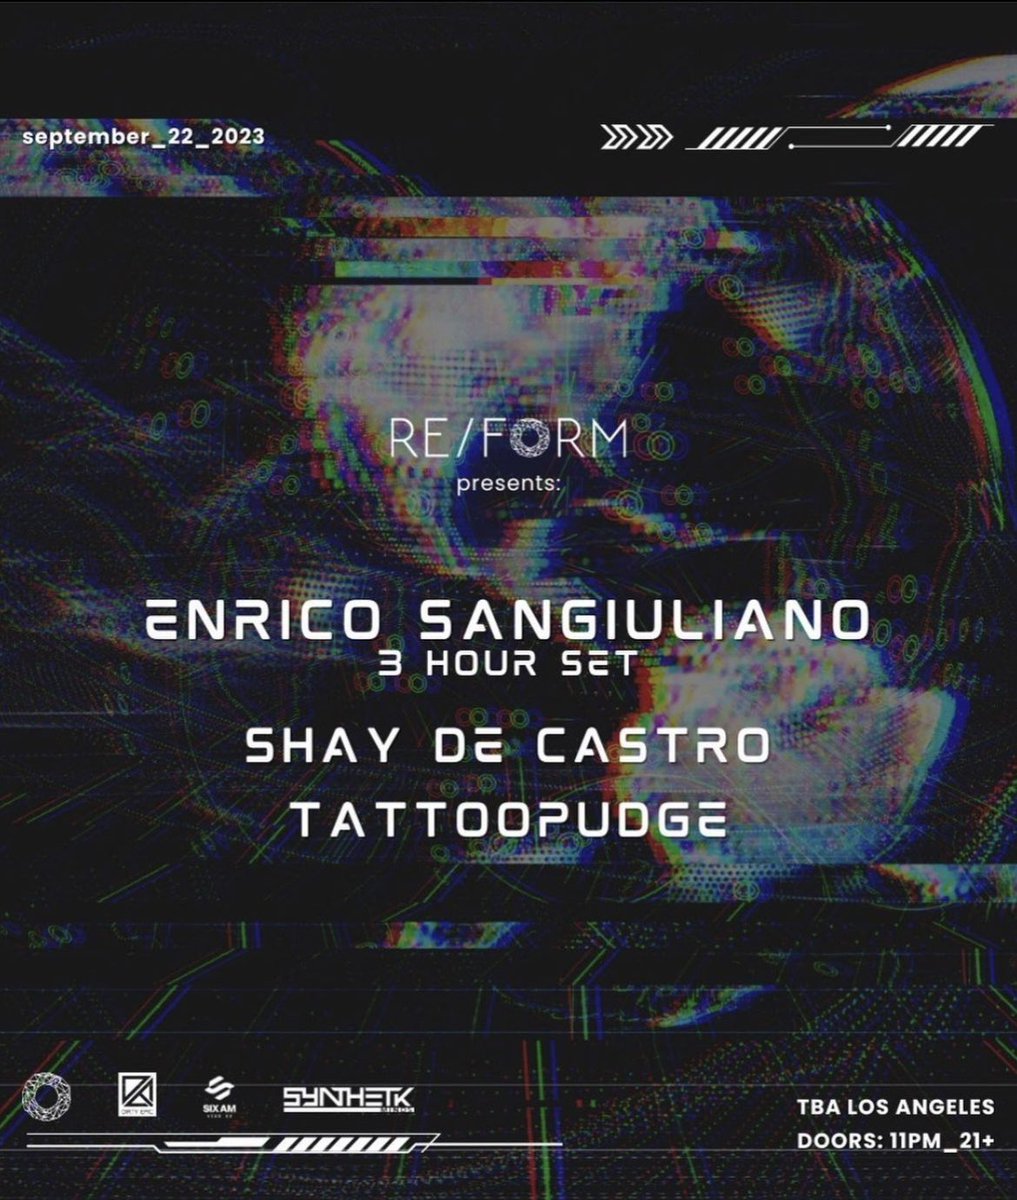 this friday September 22nd Im making my @reformpresents debut. Opening for @IAmShayDeCastro and @esangiuliano in DTLA.

link.dice.fm/2lCFMNnJeDb

#techno #undergroundtechno #reformpresents #enricosangiuliano #shaydecastro #tattoopudge #technodj #technoflag